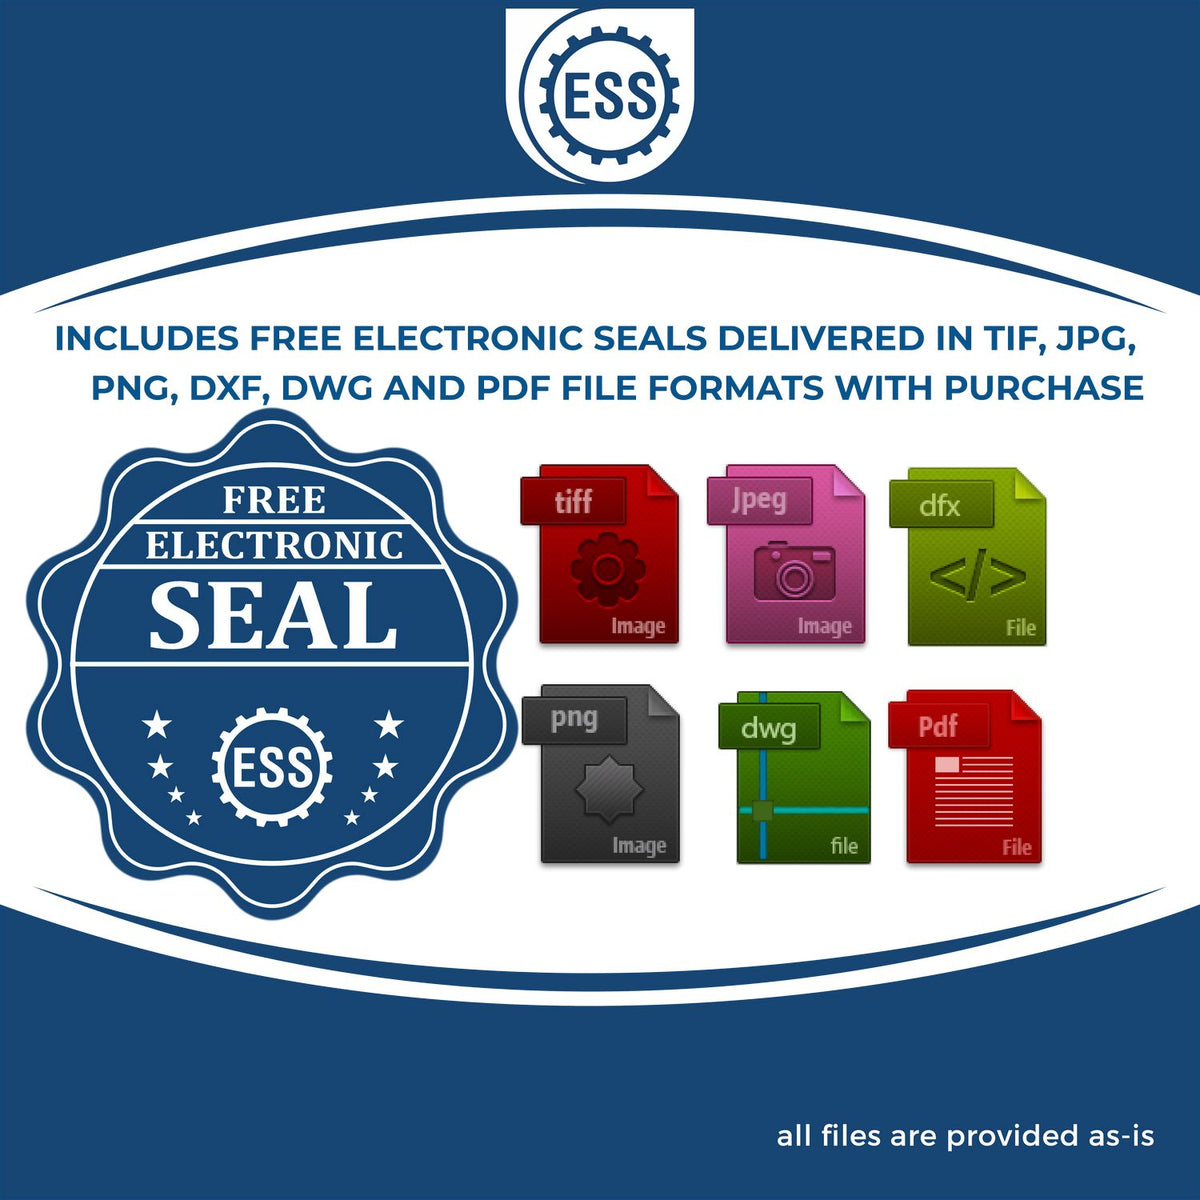 An infographic for the free electronic seal for the Gift New Hampshire Architect Seal illustrating the different file type icons such as DXF, DWG, TIF, JPG and PNG.